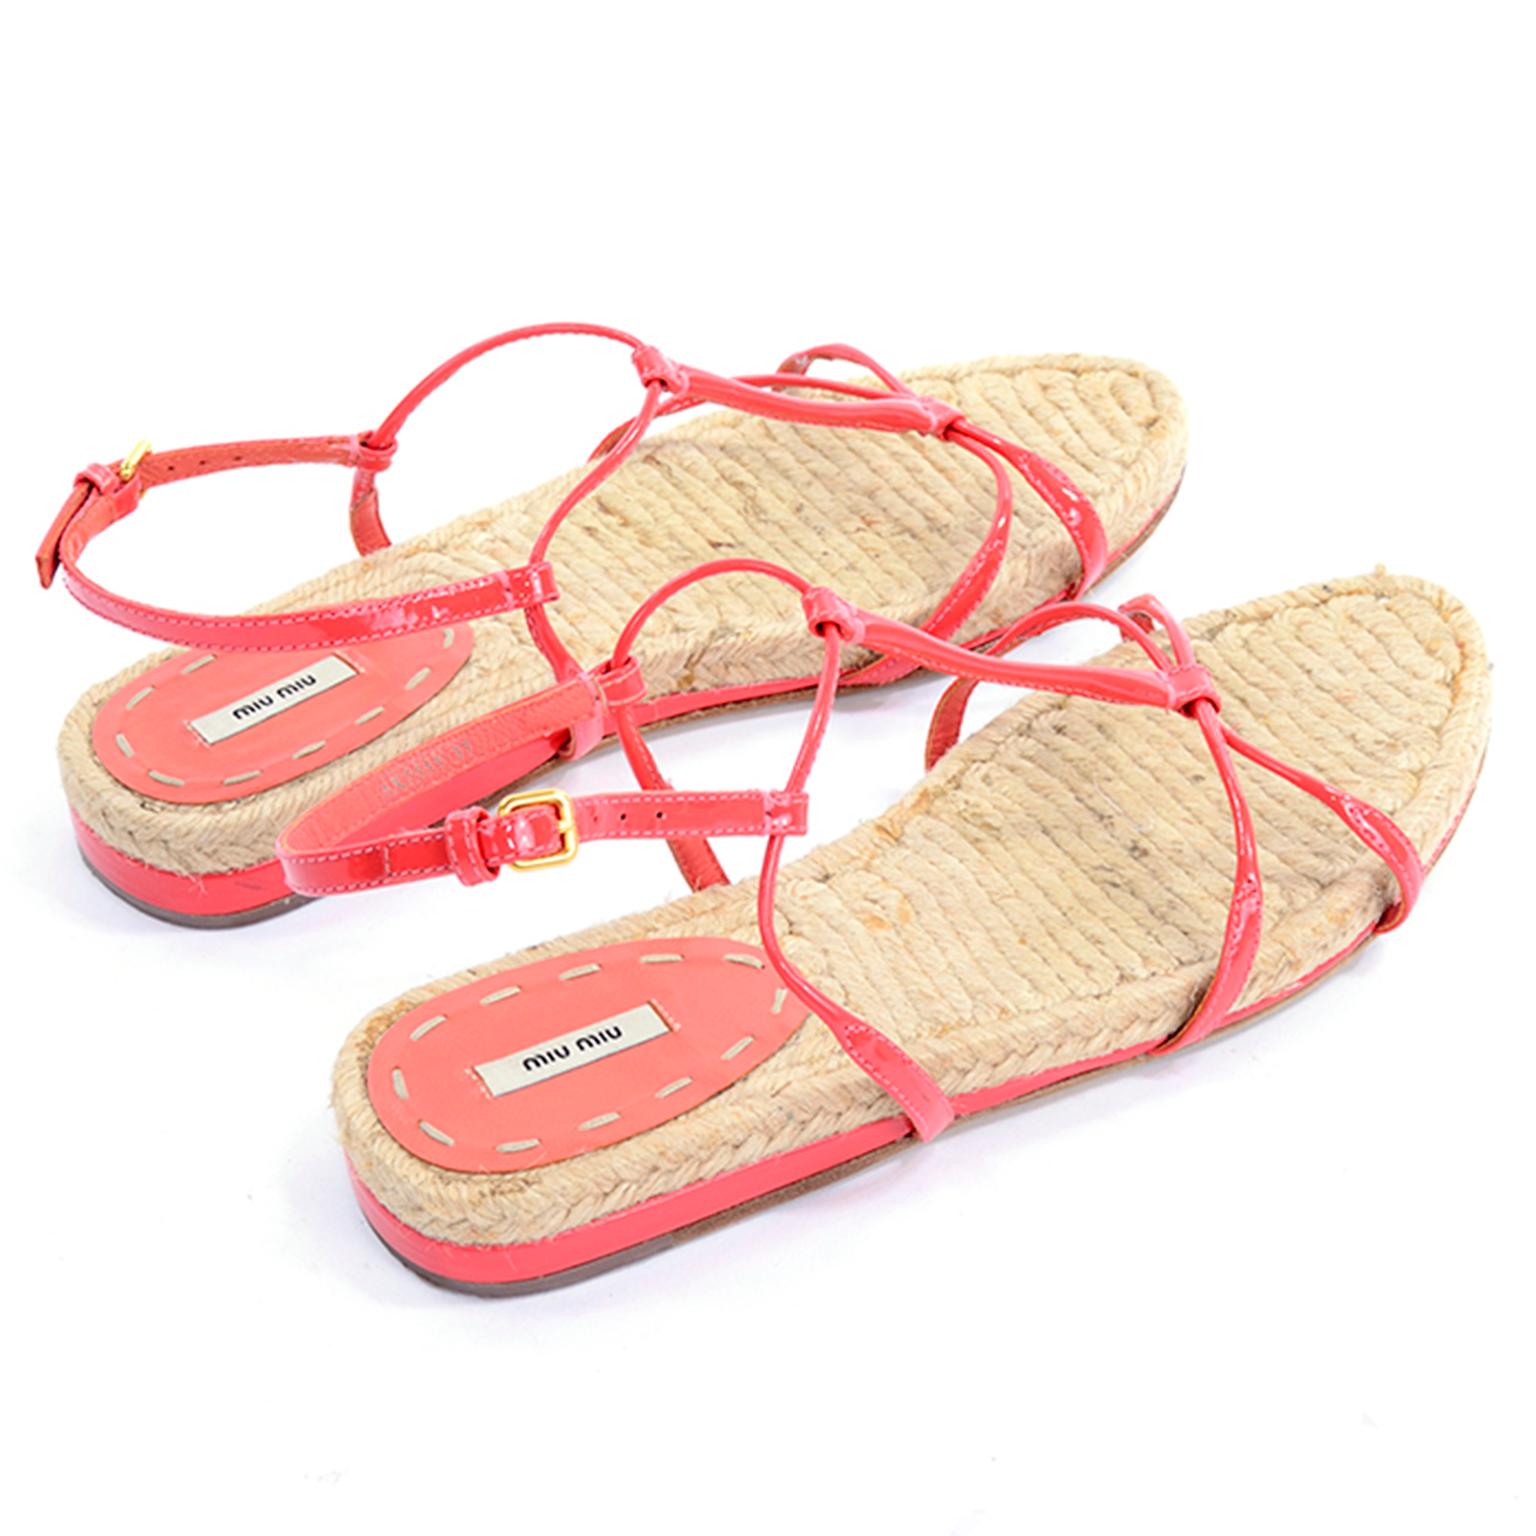 These are great coral Miu Miu sandals with and ankle strap and gladiator look! The T strap and ankle straps are all in a beautiful coral color. They have a woven straw insole similar to an espadrille and a leather sole with a rubber heel. Easy to